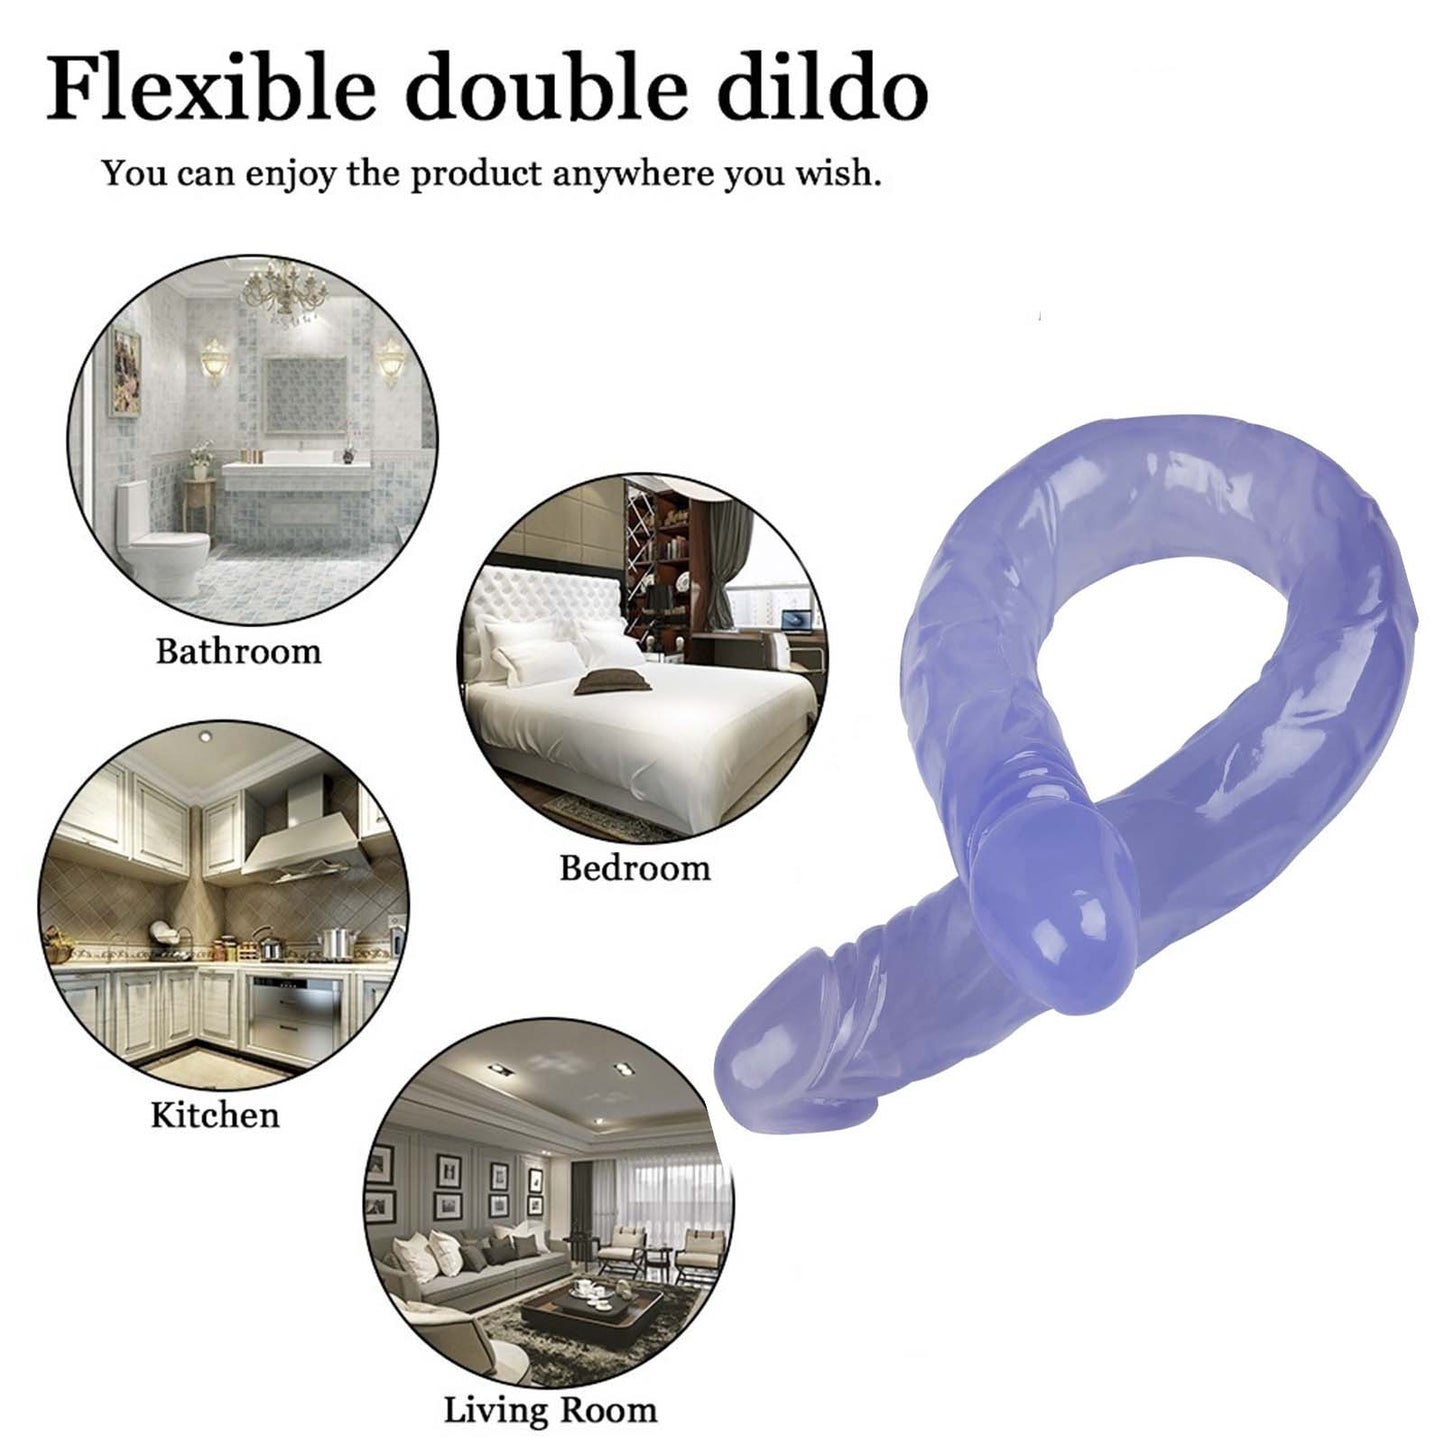 Double ended dildo for Women Realistic 21.56 inch Super Long Bendable dildo sex toys for Women Pleasure Beginners Soft massage wand for Couple